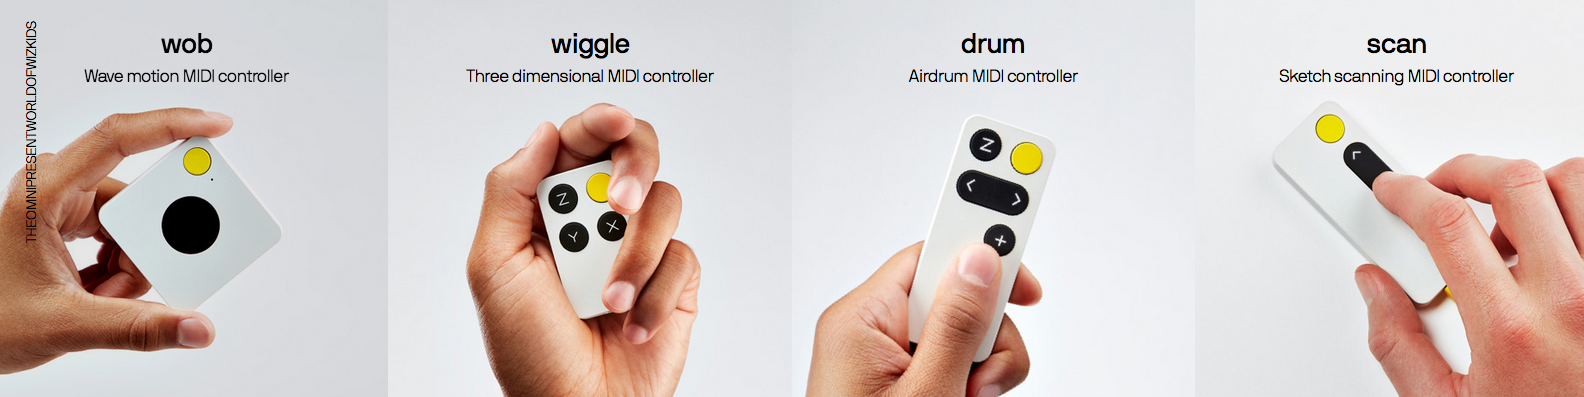 8 Unusual MIDI Controllers for Music Production